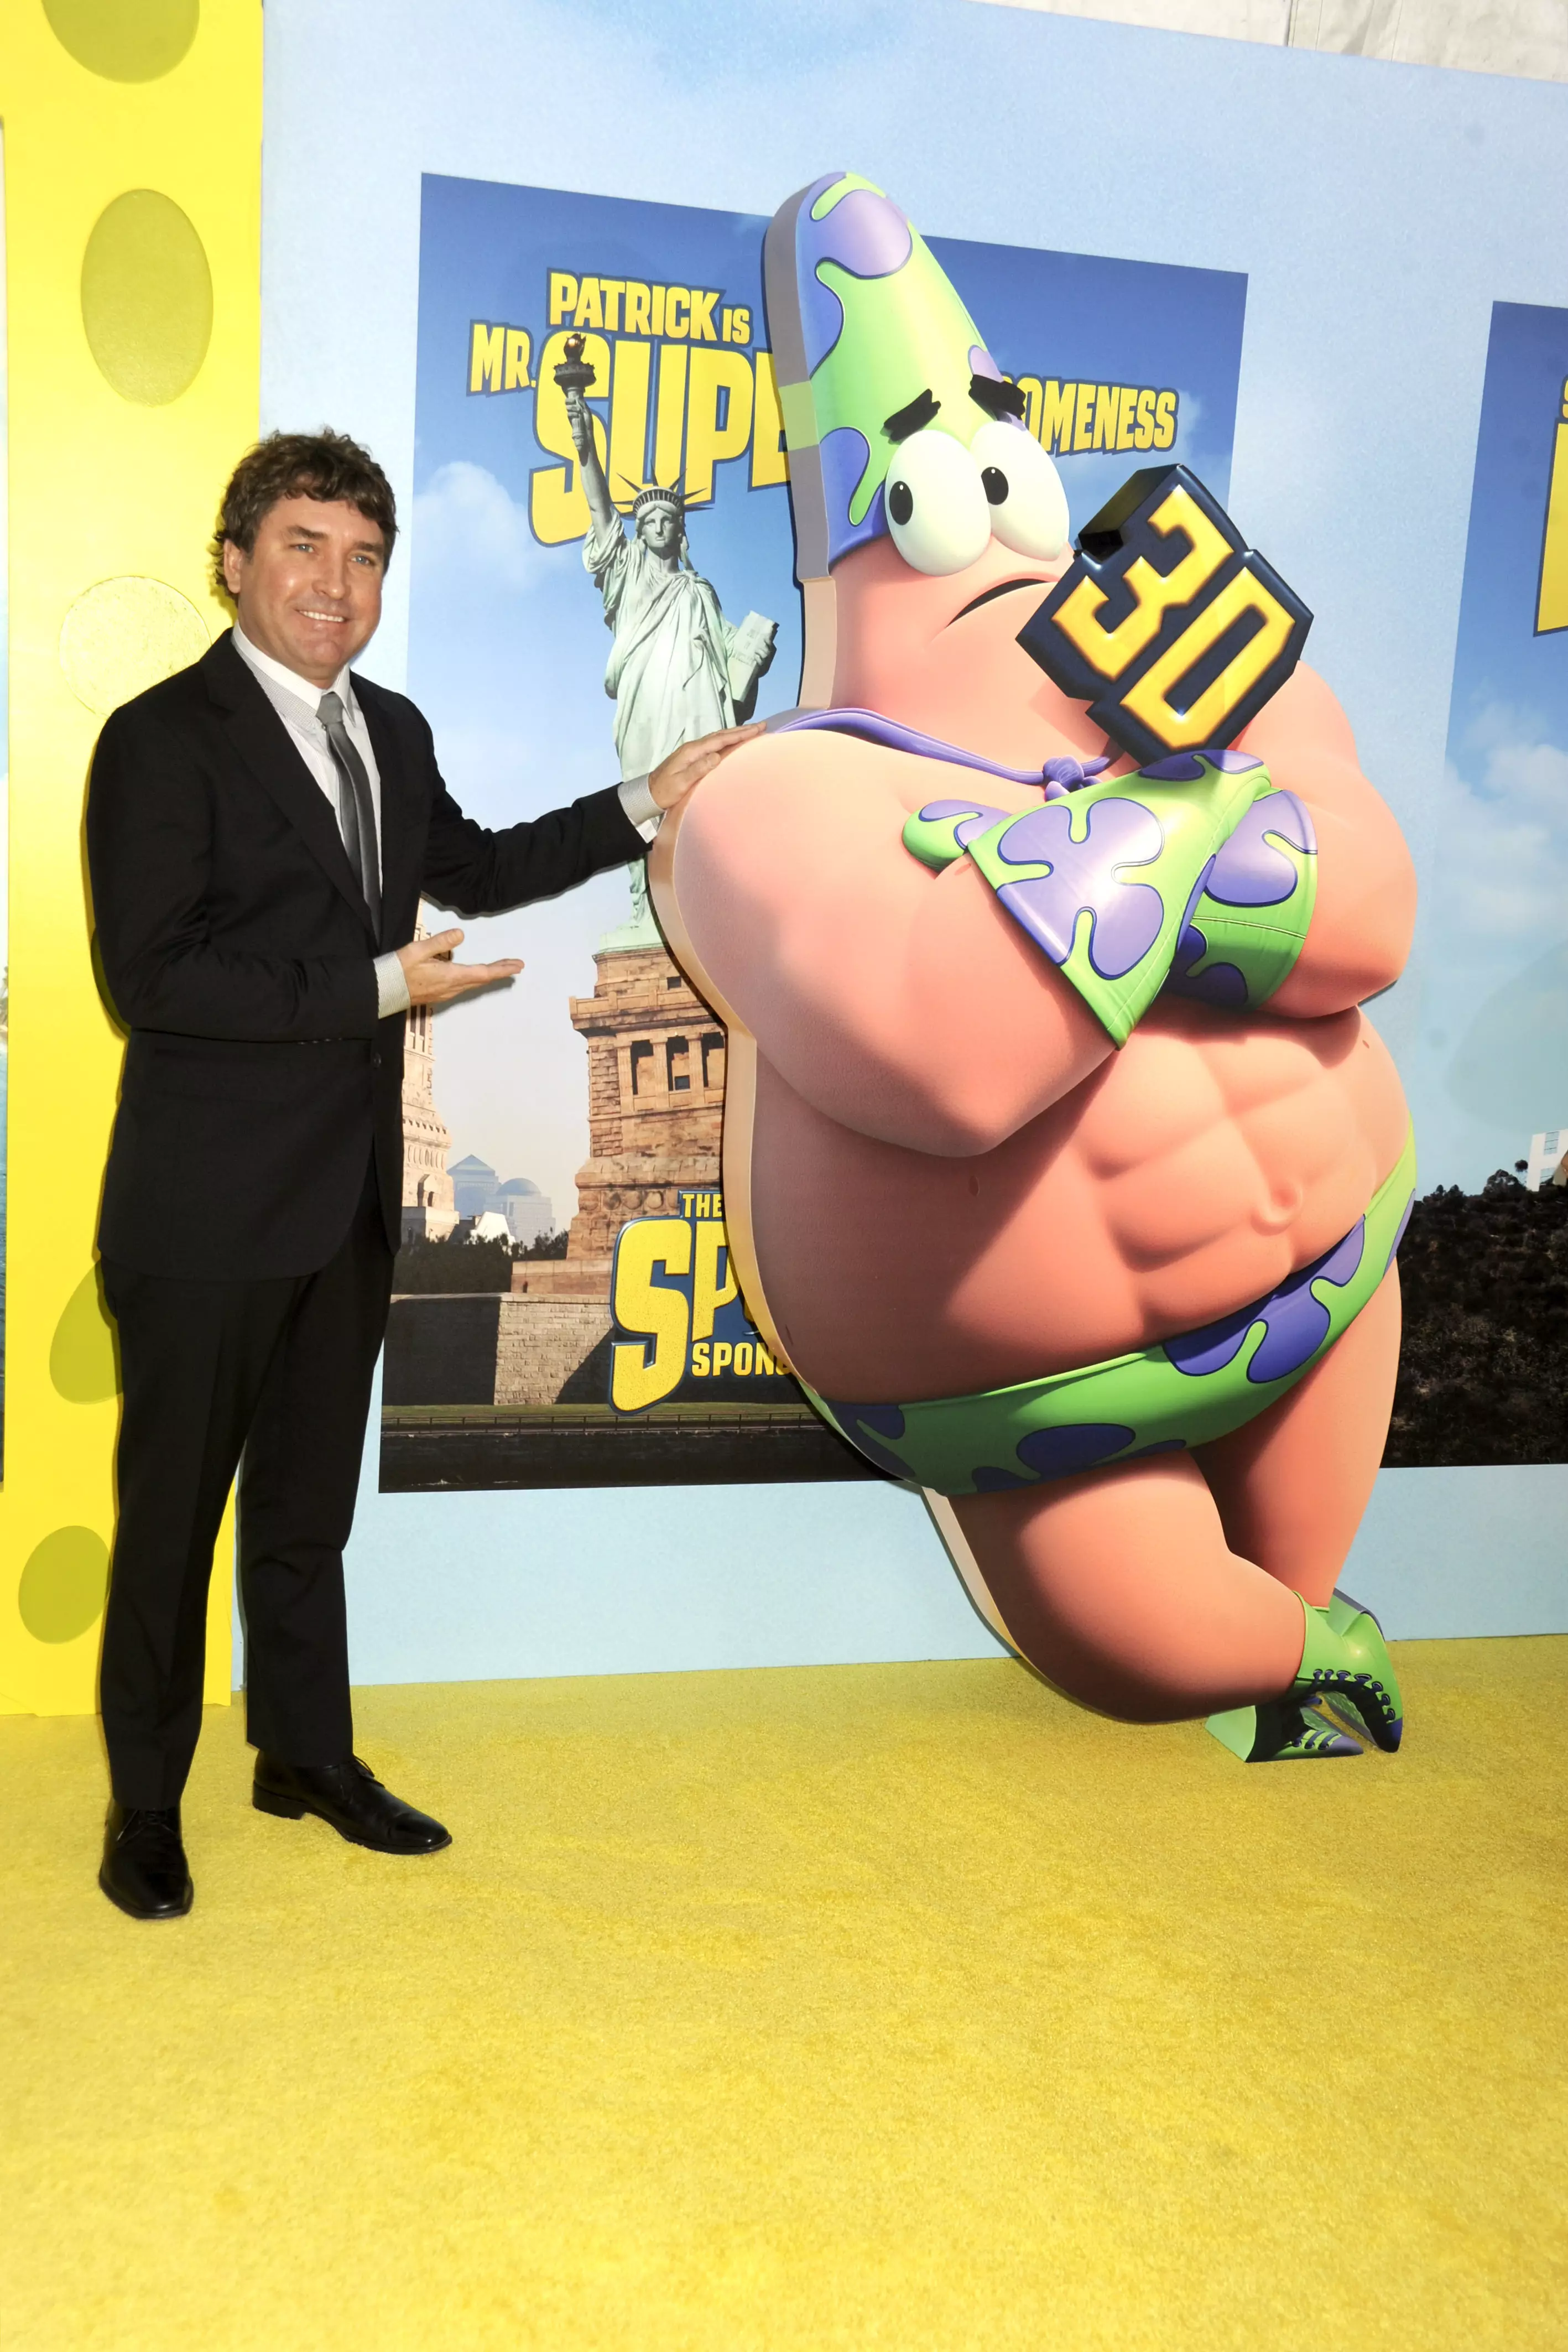 The late Stephen Hillenburg created the series.